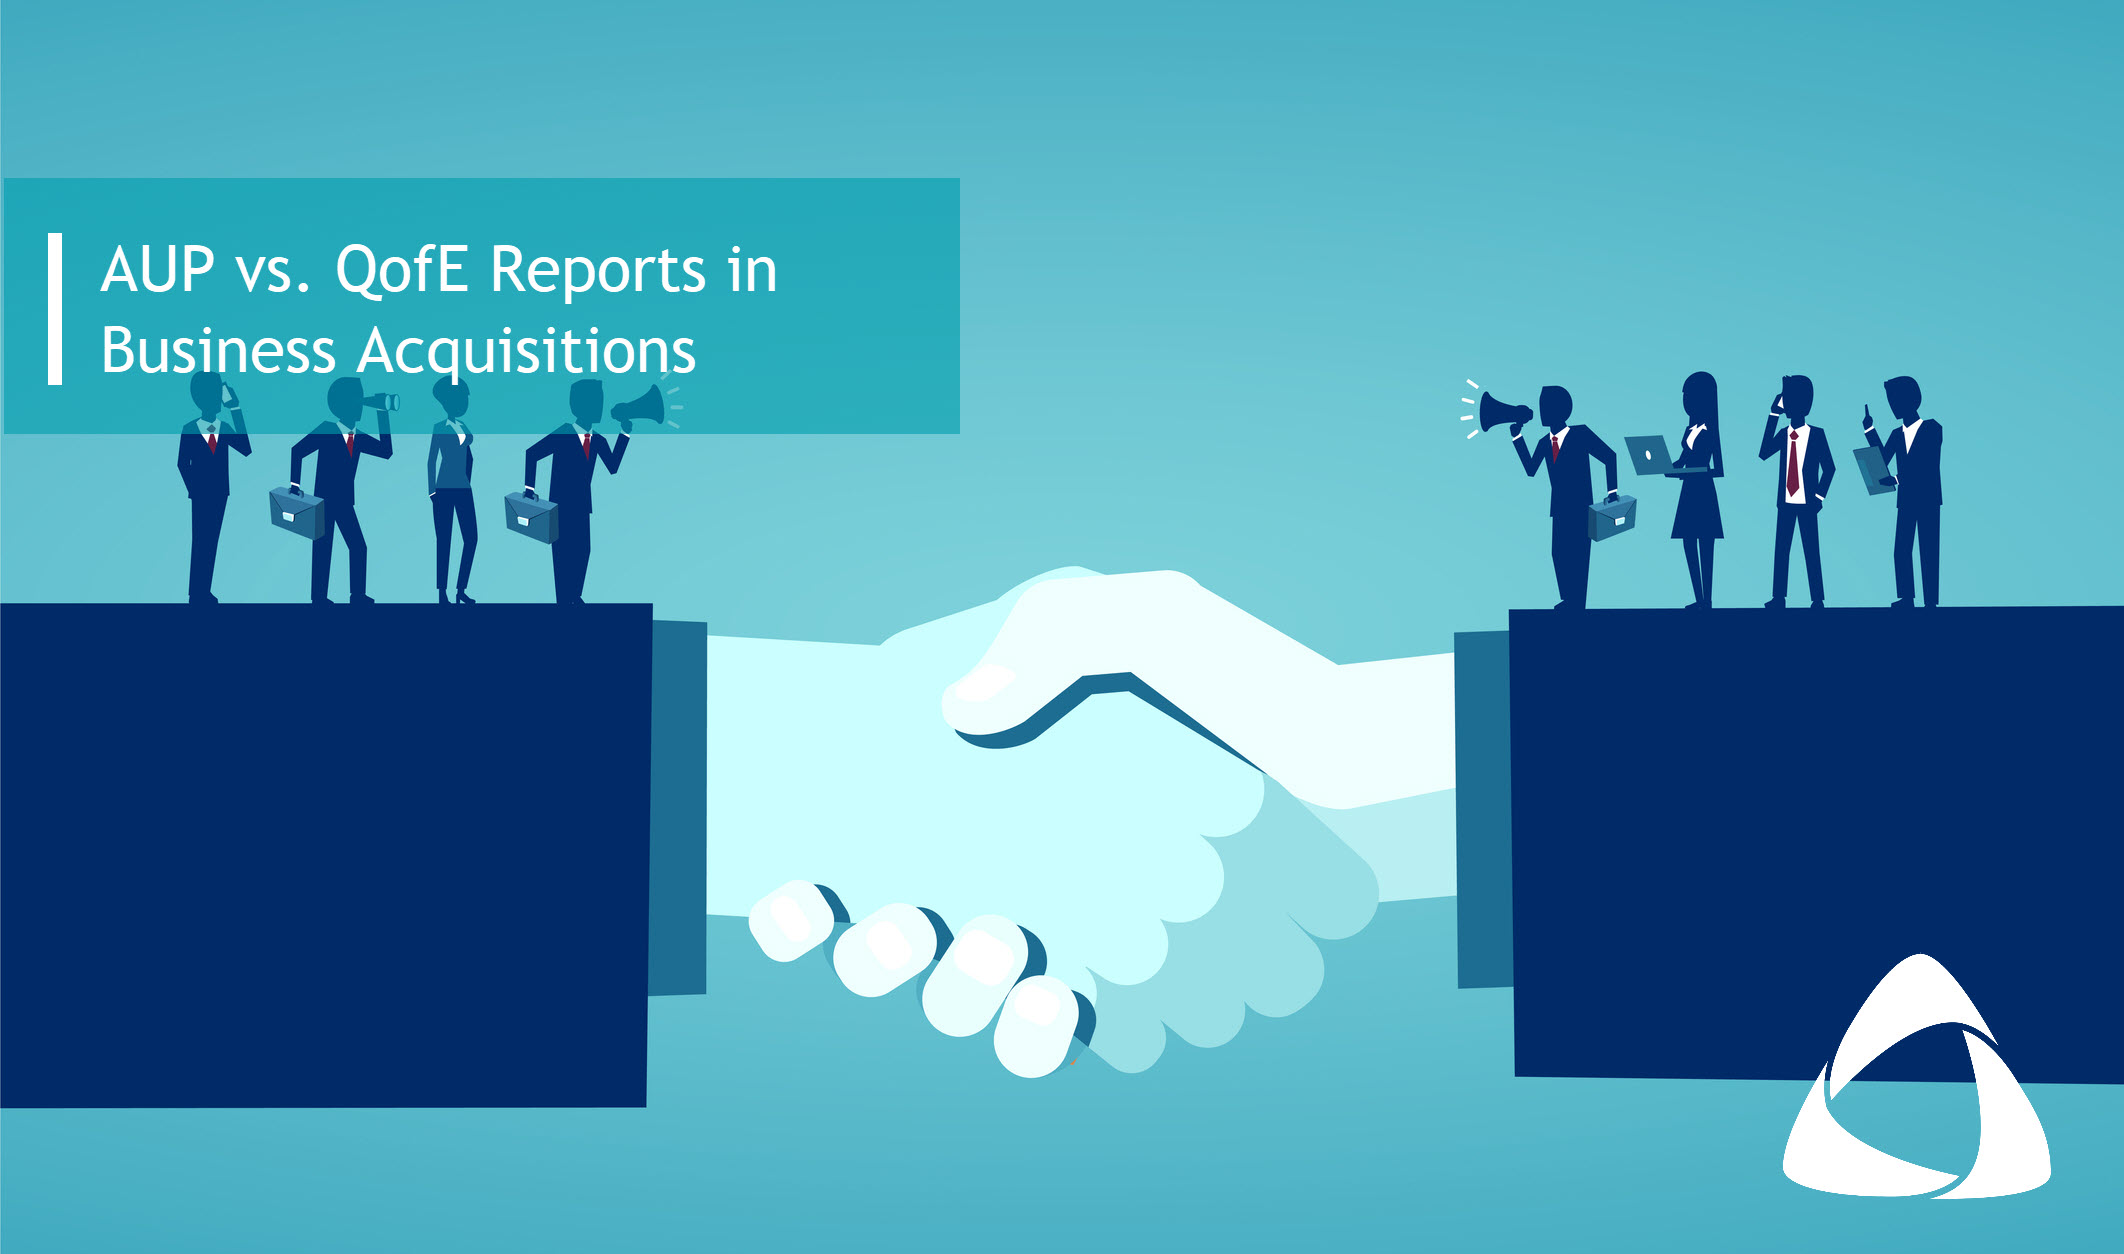 AUP vs. QofE Reports in Business Acquisitions